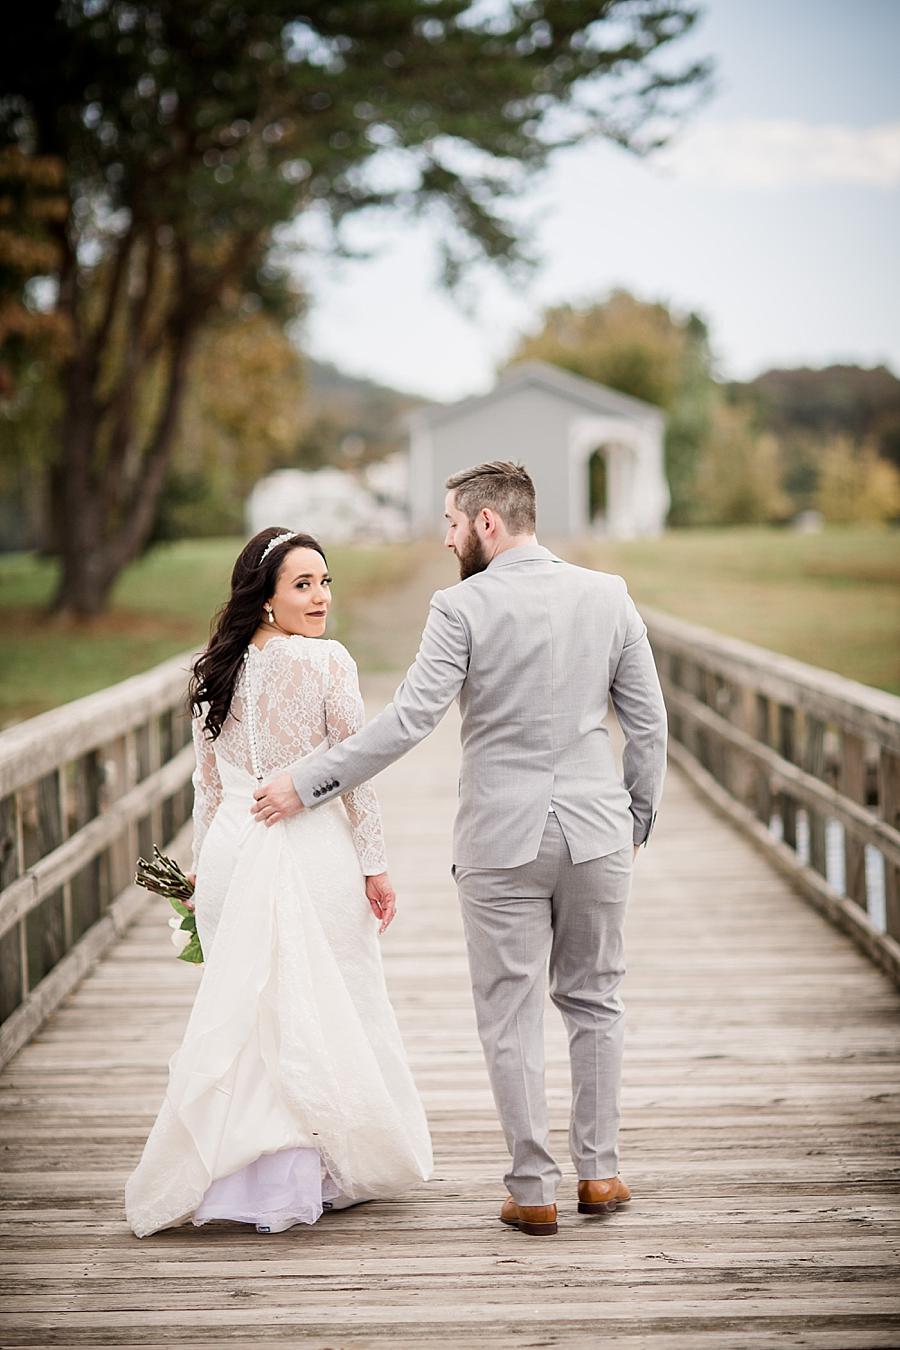 Walking together at this Toqua Campground Wedding by Knoxville Wedding Photographer, Amanda May Photos.